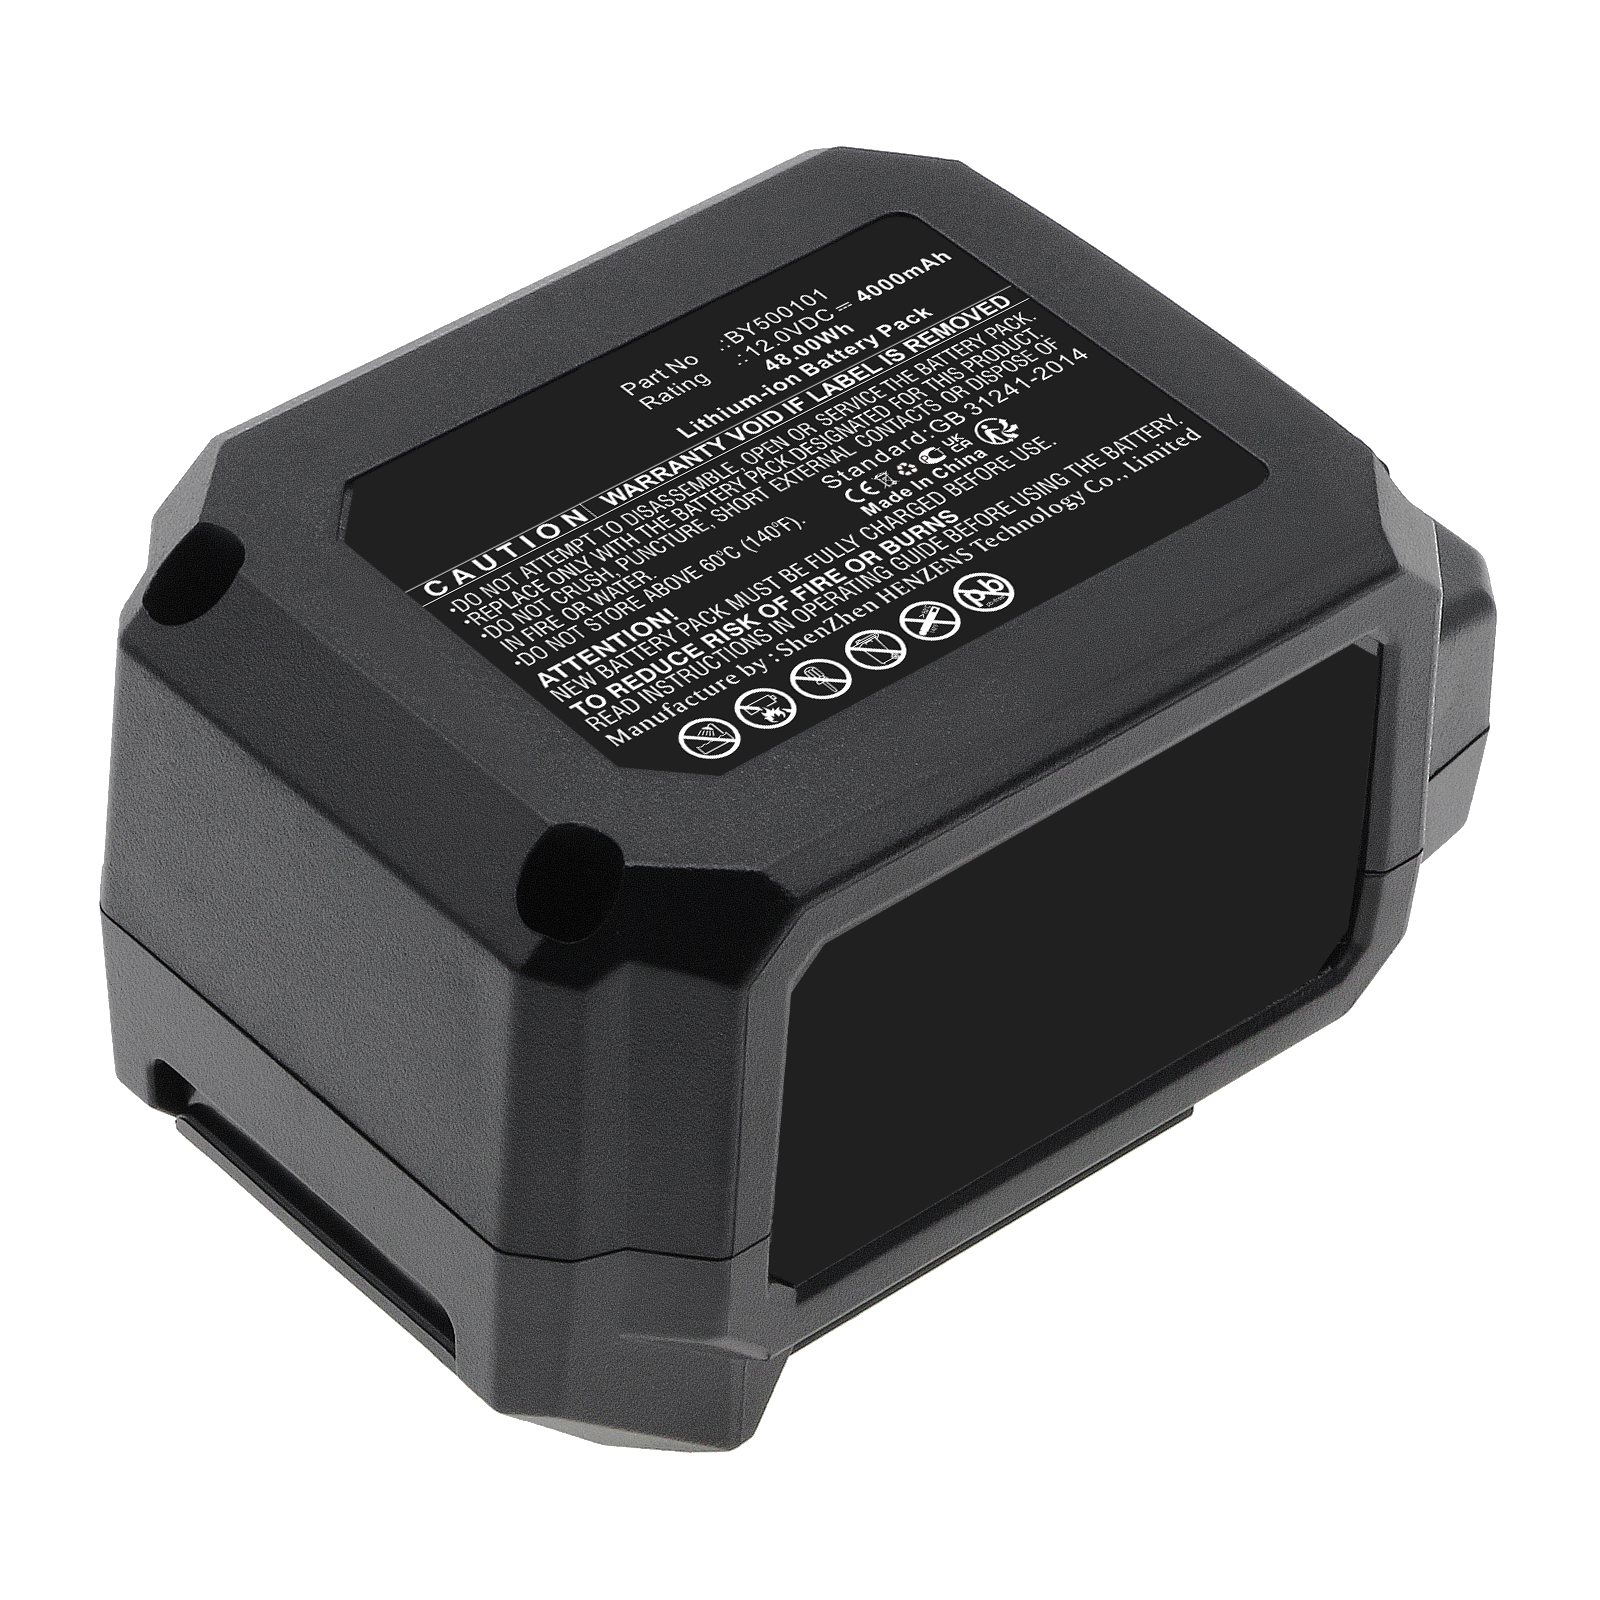 Synergy Digital Power Tool Battery, Compatible with Skil BY500101 Power Tool Battery (Li-ion, 12V, 4000mAh)